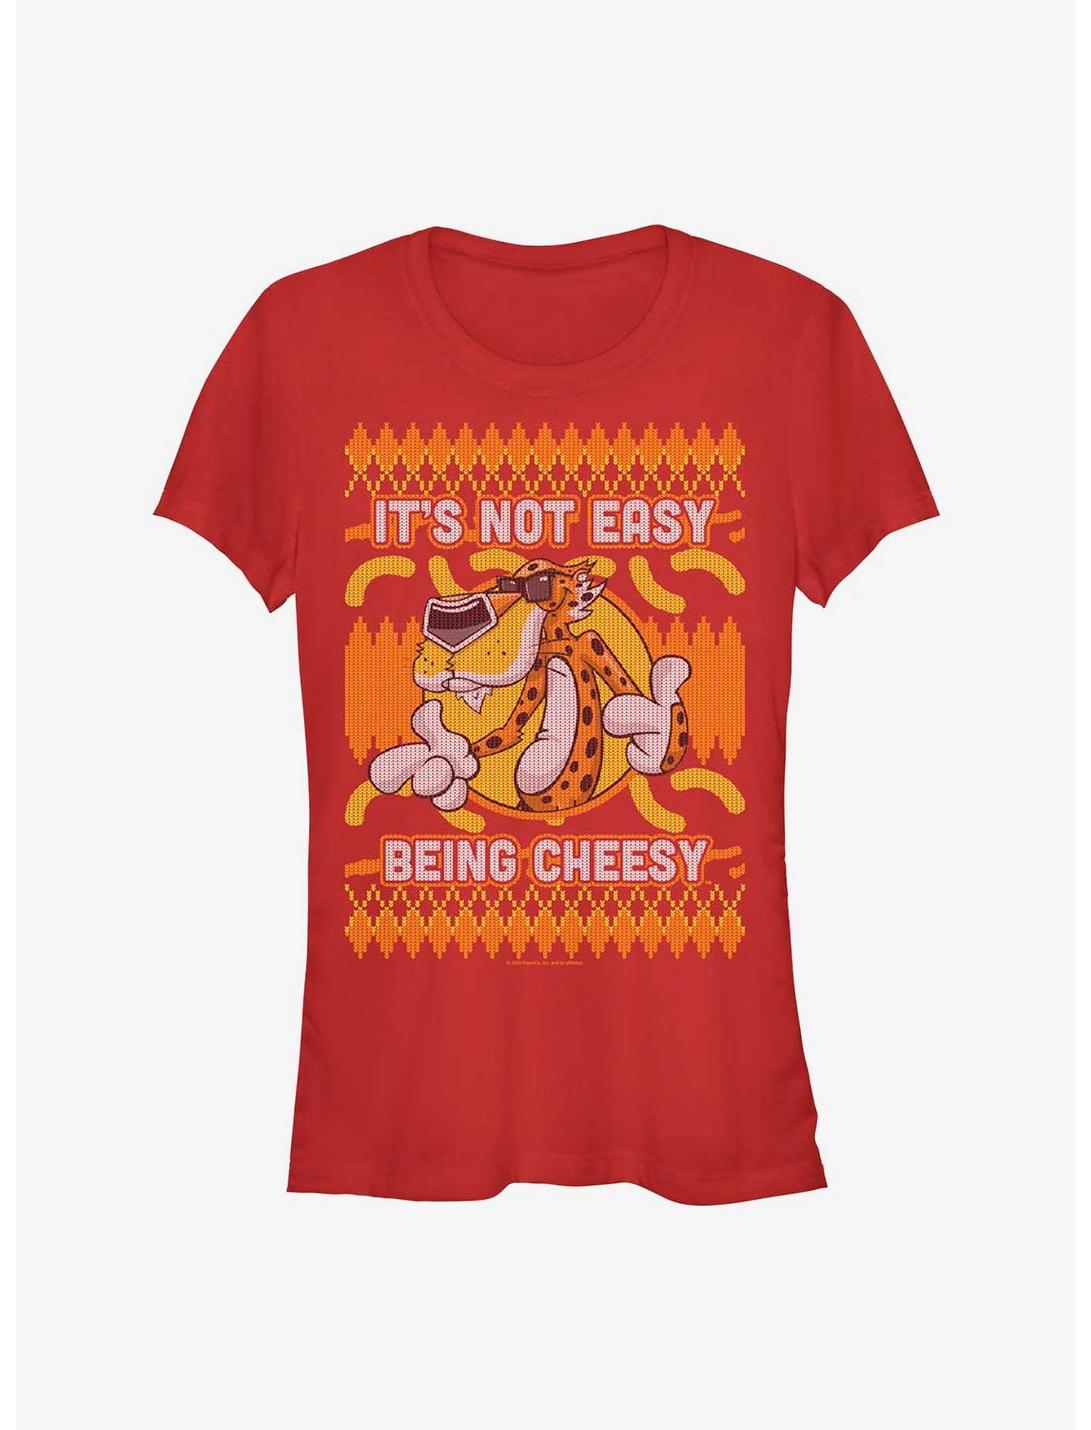 Cheetos Chester Cheetah Ugly Christmas Sweater Pattern Girls T-Shirt, RED, hi-res